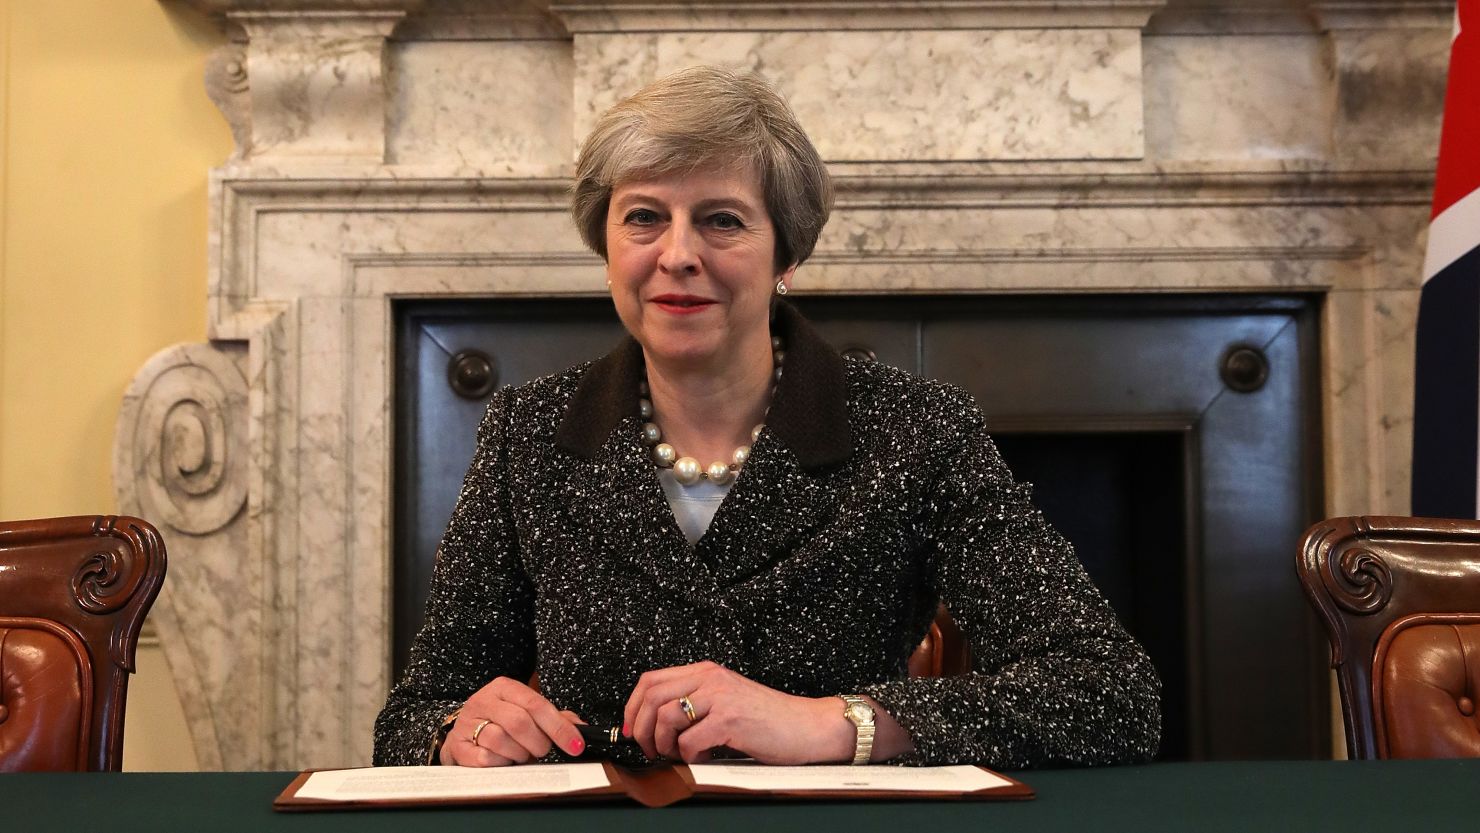 UK Prime Minister Theresa May signs the letter that officially kicked off Brexit in late March.